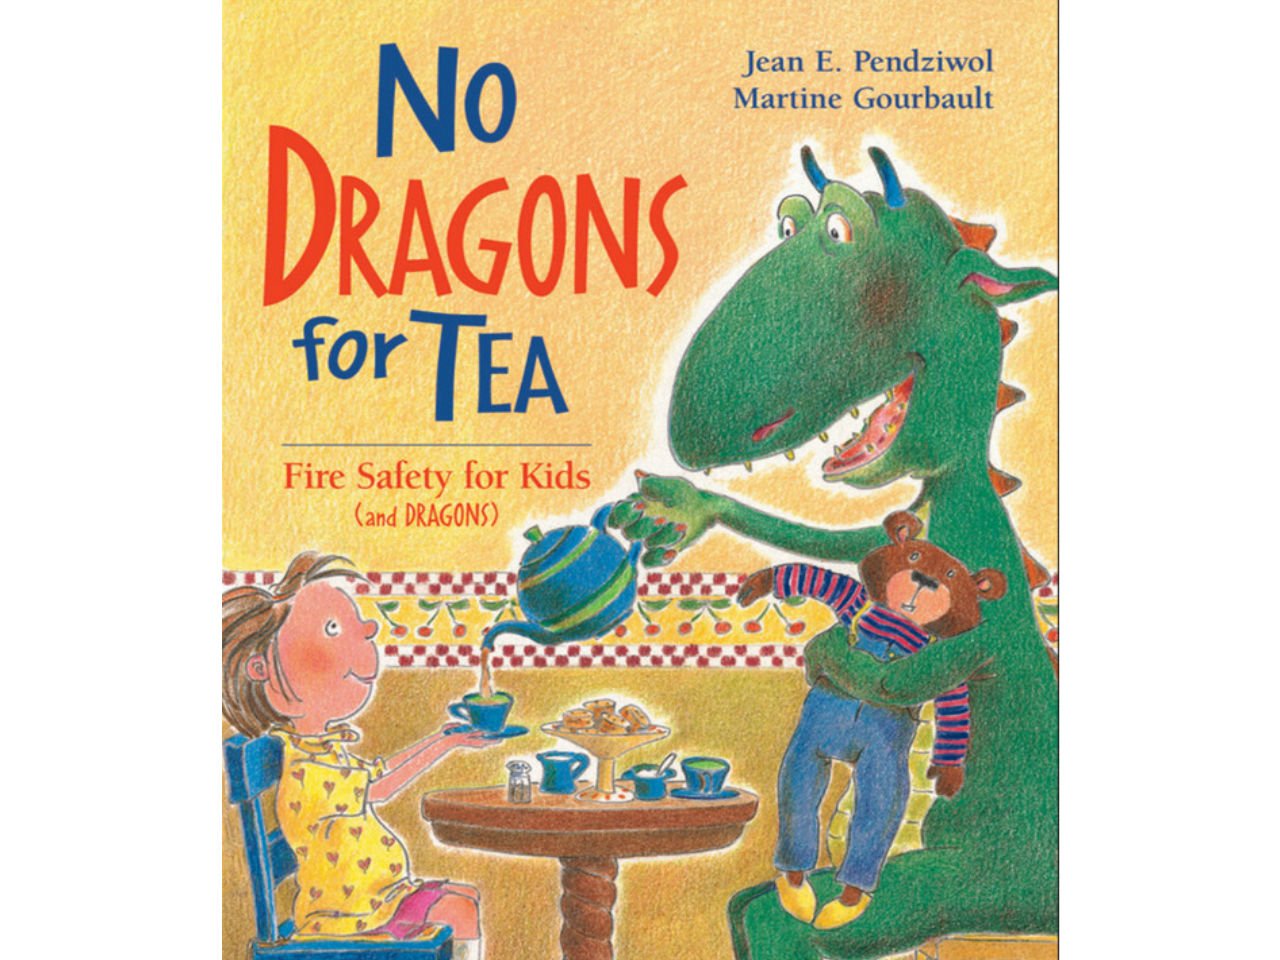 children's book with a dragon and little girl having a tea party